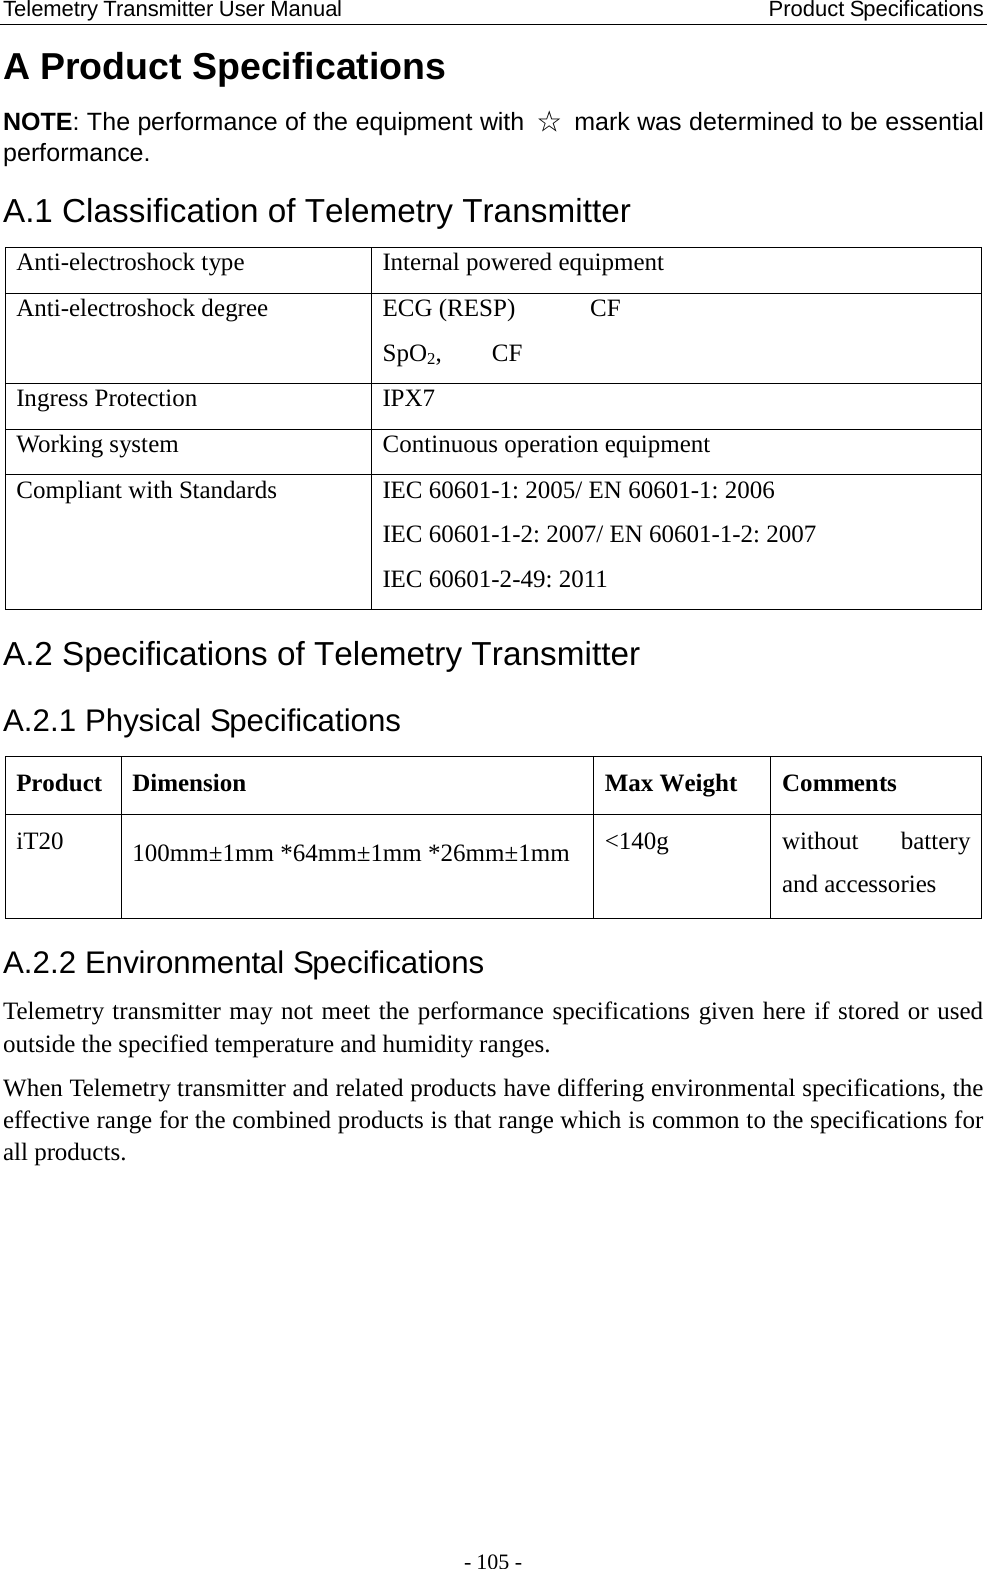 Telemetry Transmitter User Manual                                       Product Specifications   A Product Specifications NOTE: The performance of the equipment with  ☆ mark was determined to be essential performance. A.1 Classification of Telemetry Transmitter Anti-electroshock type Internal powered equipment Anti-electroshock degree ECG (RESP)      CF SpO2,    CF Ingress Protection IPX7 Working system Continuous operation equipment Compliant with Standards IEC 60601-1: 2005/ EN 60601-1: 2006 IEC 60601-1-2: 2007/ EN 60601-1-2: 2007 IEC 60601-2-49: 2011 A.2 Specifications of Telemetry Transmitter A.2.1 Physical Specifications Product Dimension Max Weight Comments iT20 100mm±1mm *64mm±1mm *26mm±1mm &lt;140g without  battery and accessories A.2.2 Environmental Specifications   Telemetry transmitter may not meet the performance specifications given here if stored or used outside the specified temperature and humidity ranges.   When Telemetry transmitter and related products have differing environmental specifications, the effective range for the combined products is that range which is common to the specifications for all products.   - 105 - 